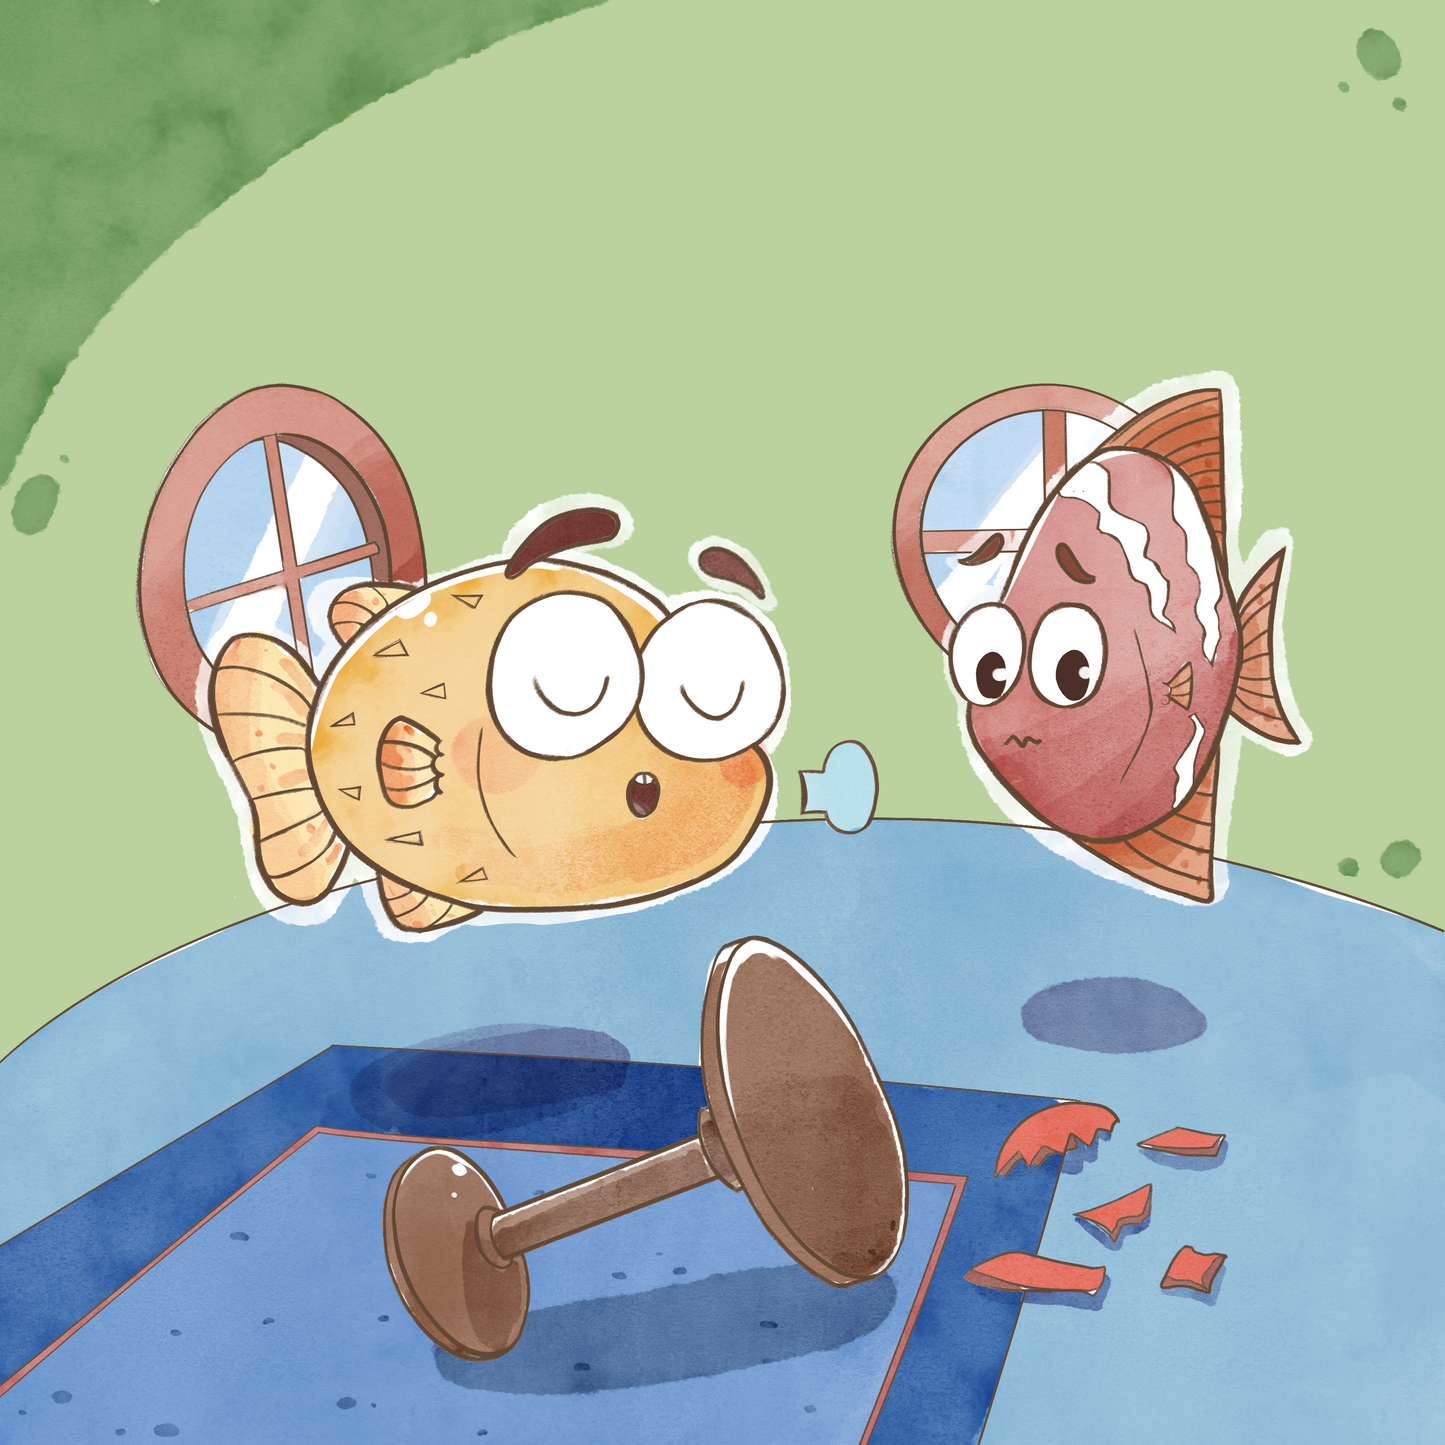 The Angry Fish: A Children's Book About Managing Anger